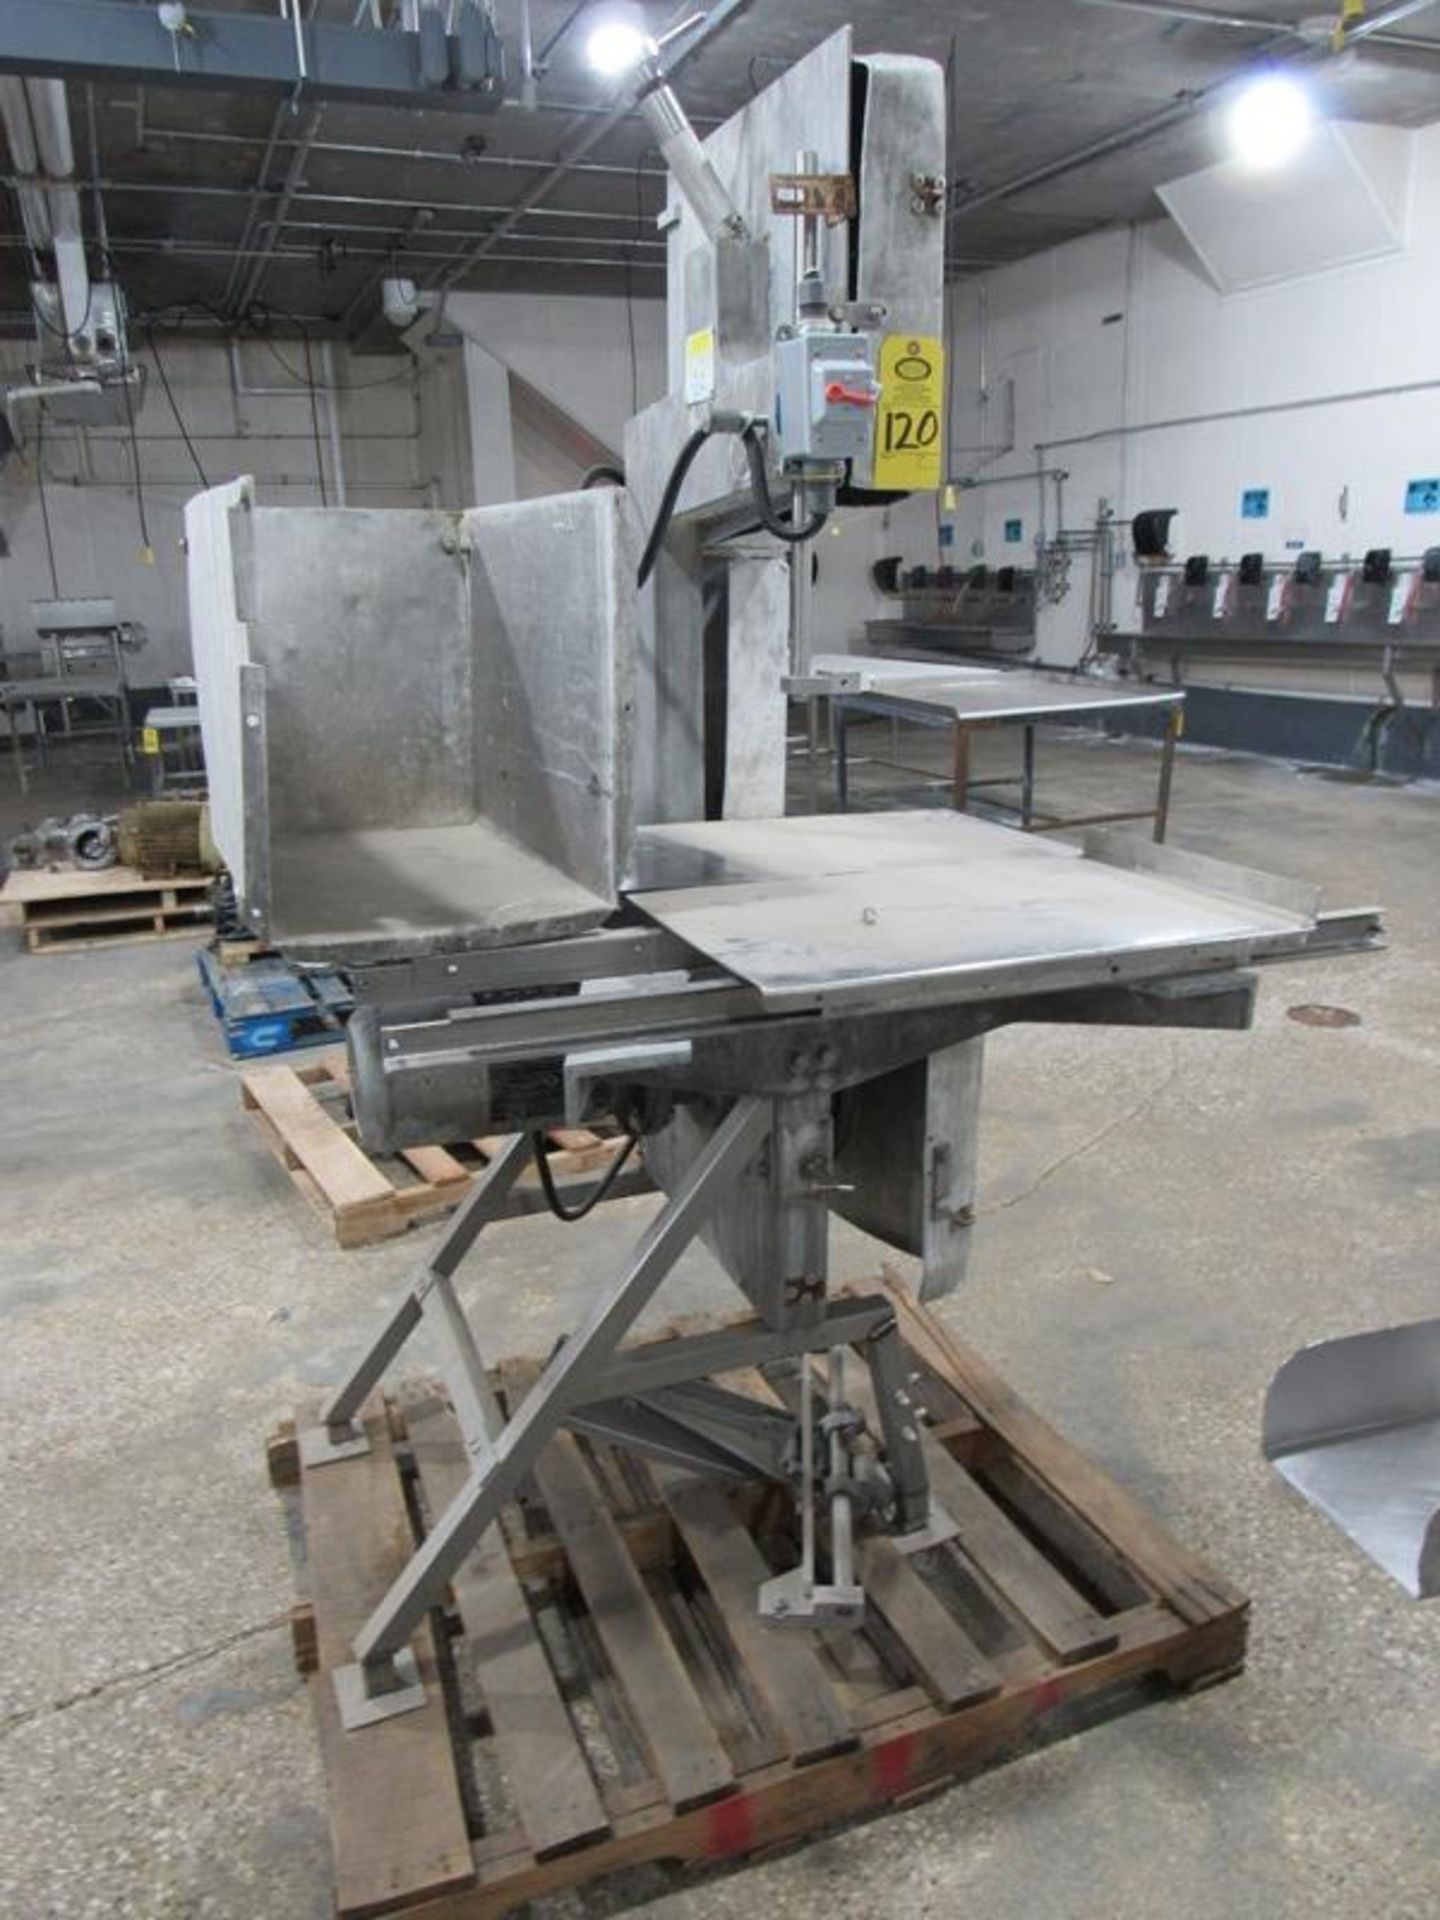 AEW Mdl. 400M Band Saw, Ser. #LHS120585 Removal: By Appointment Only. Required Rigging Fee $50.00.